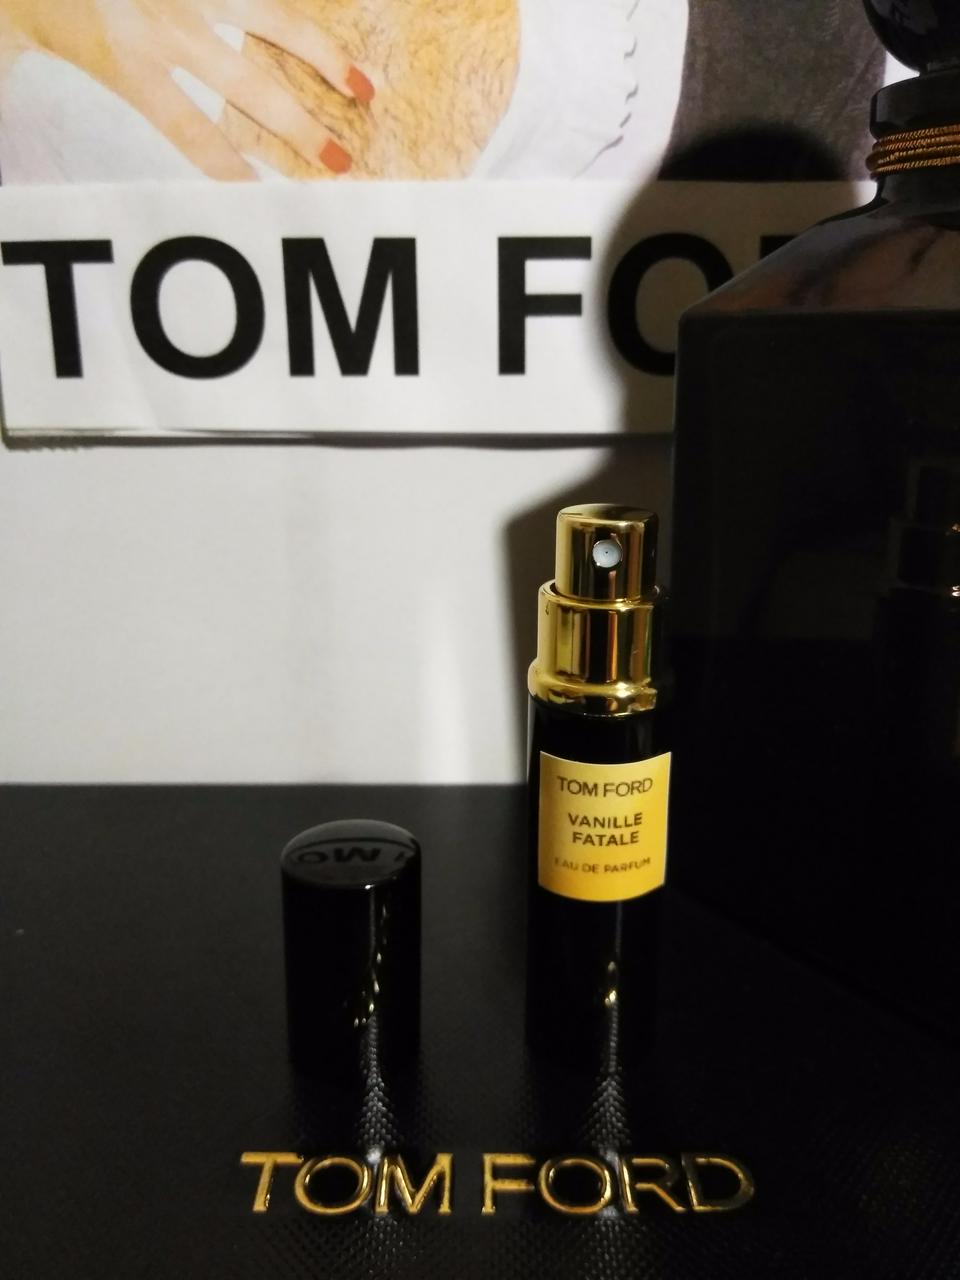 5ml VANILLE FATALE Authentic TOM FORD Perfume Spray Atomizer